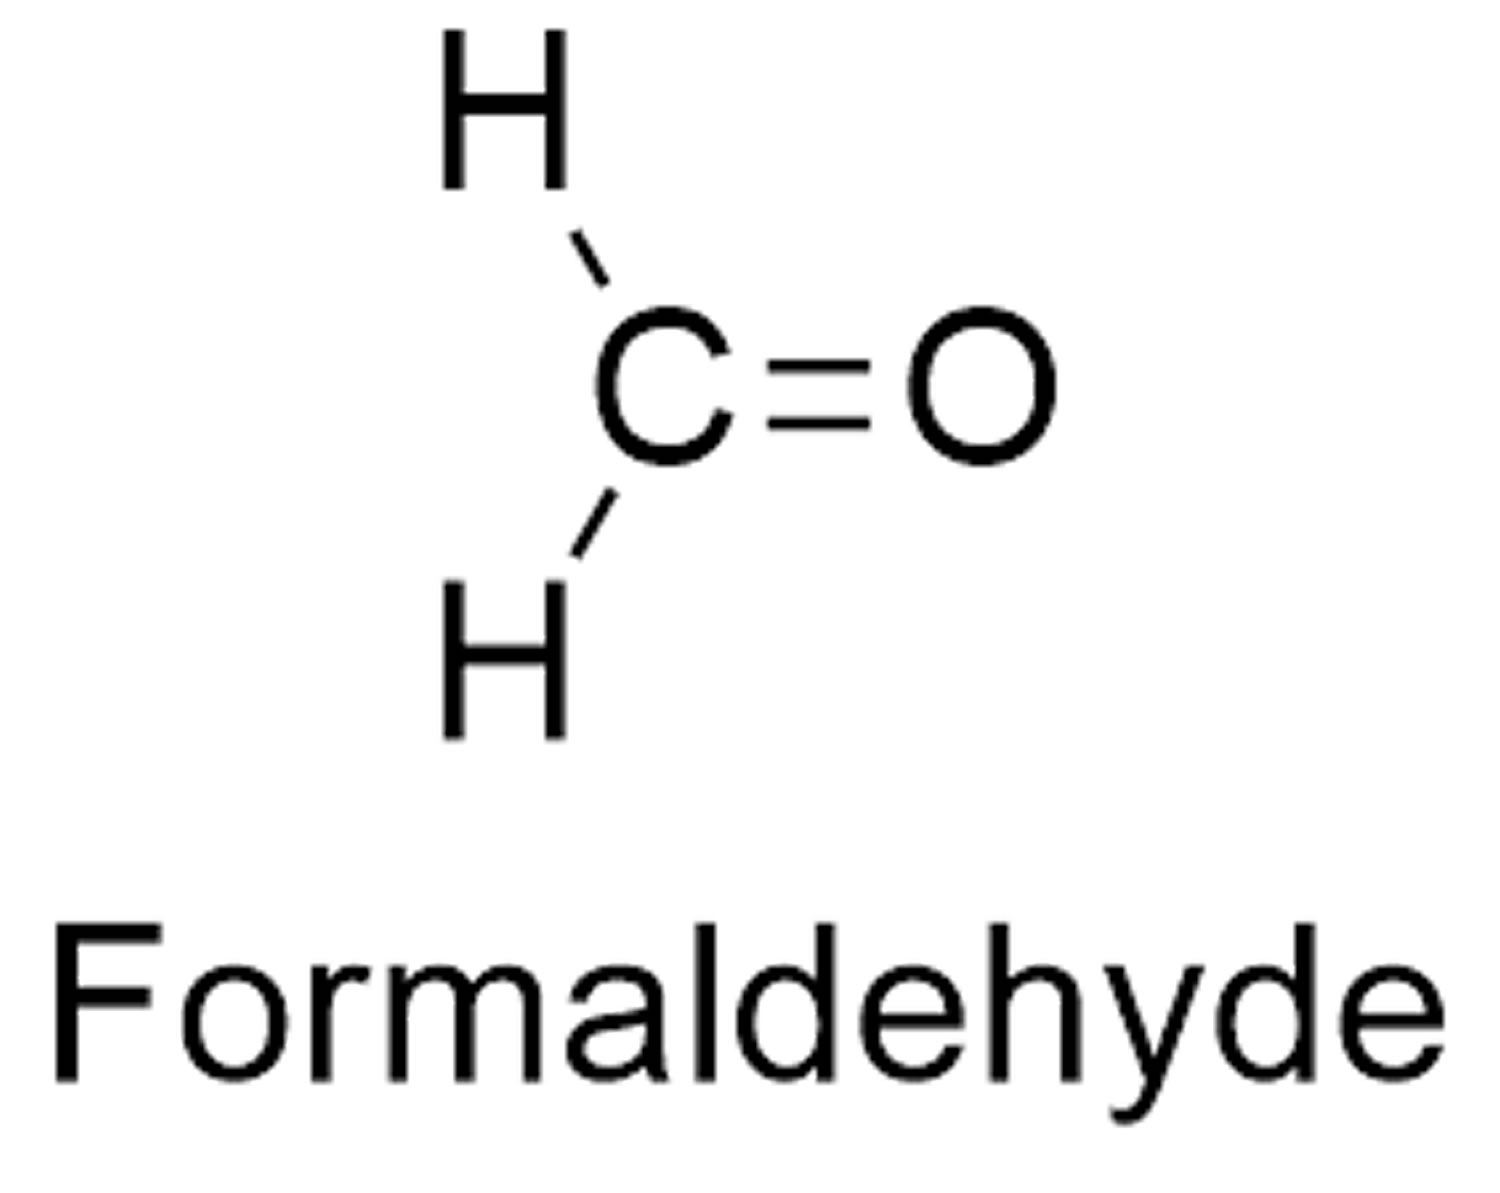 when was formaldehyde first used